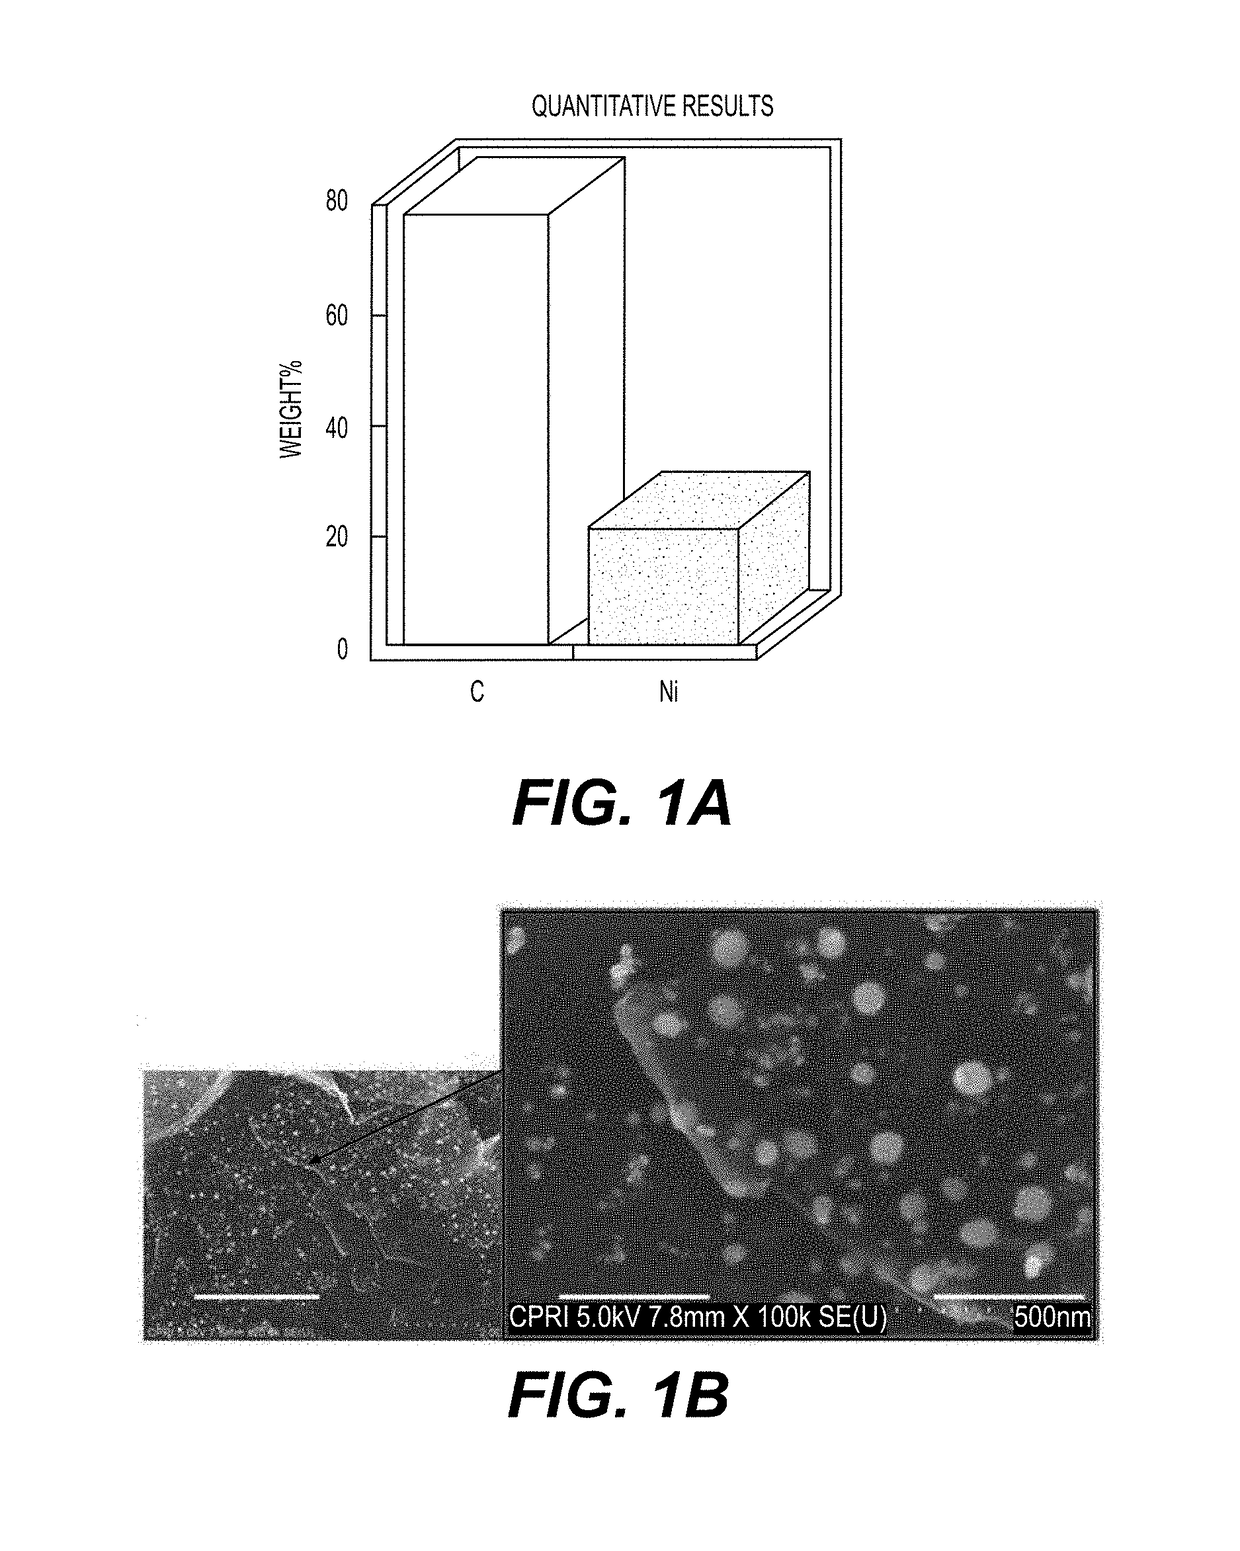 Graphene-nano particle composite having nanoparticles crystallized therein at a high density